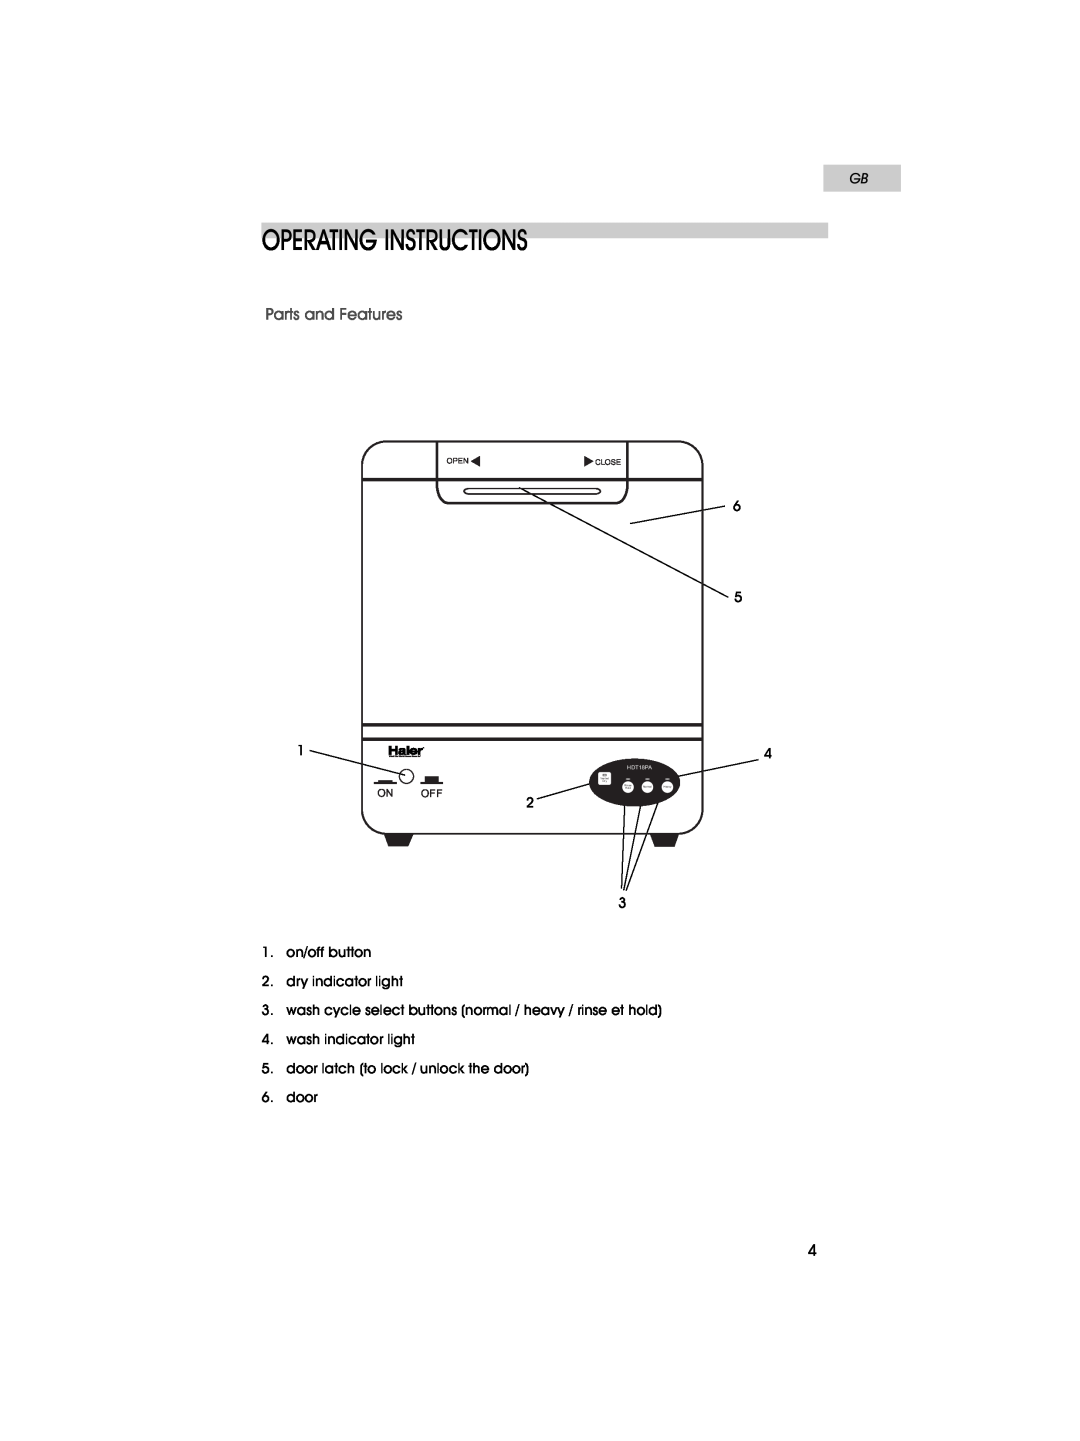 Haier HDT18PA user manual Operating Instructions, Parts and Features, On Off, Openclose, Vented, Rinse, Normal, Heavy, Hold 